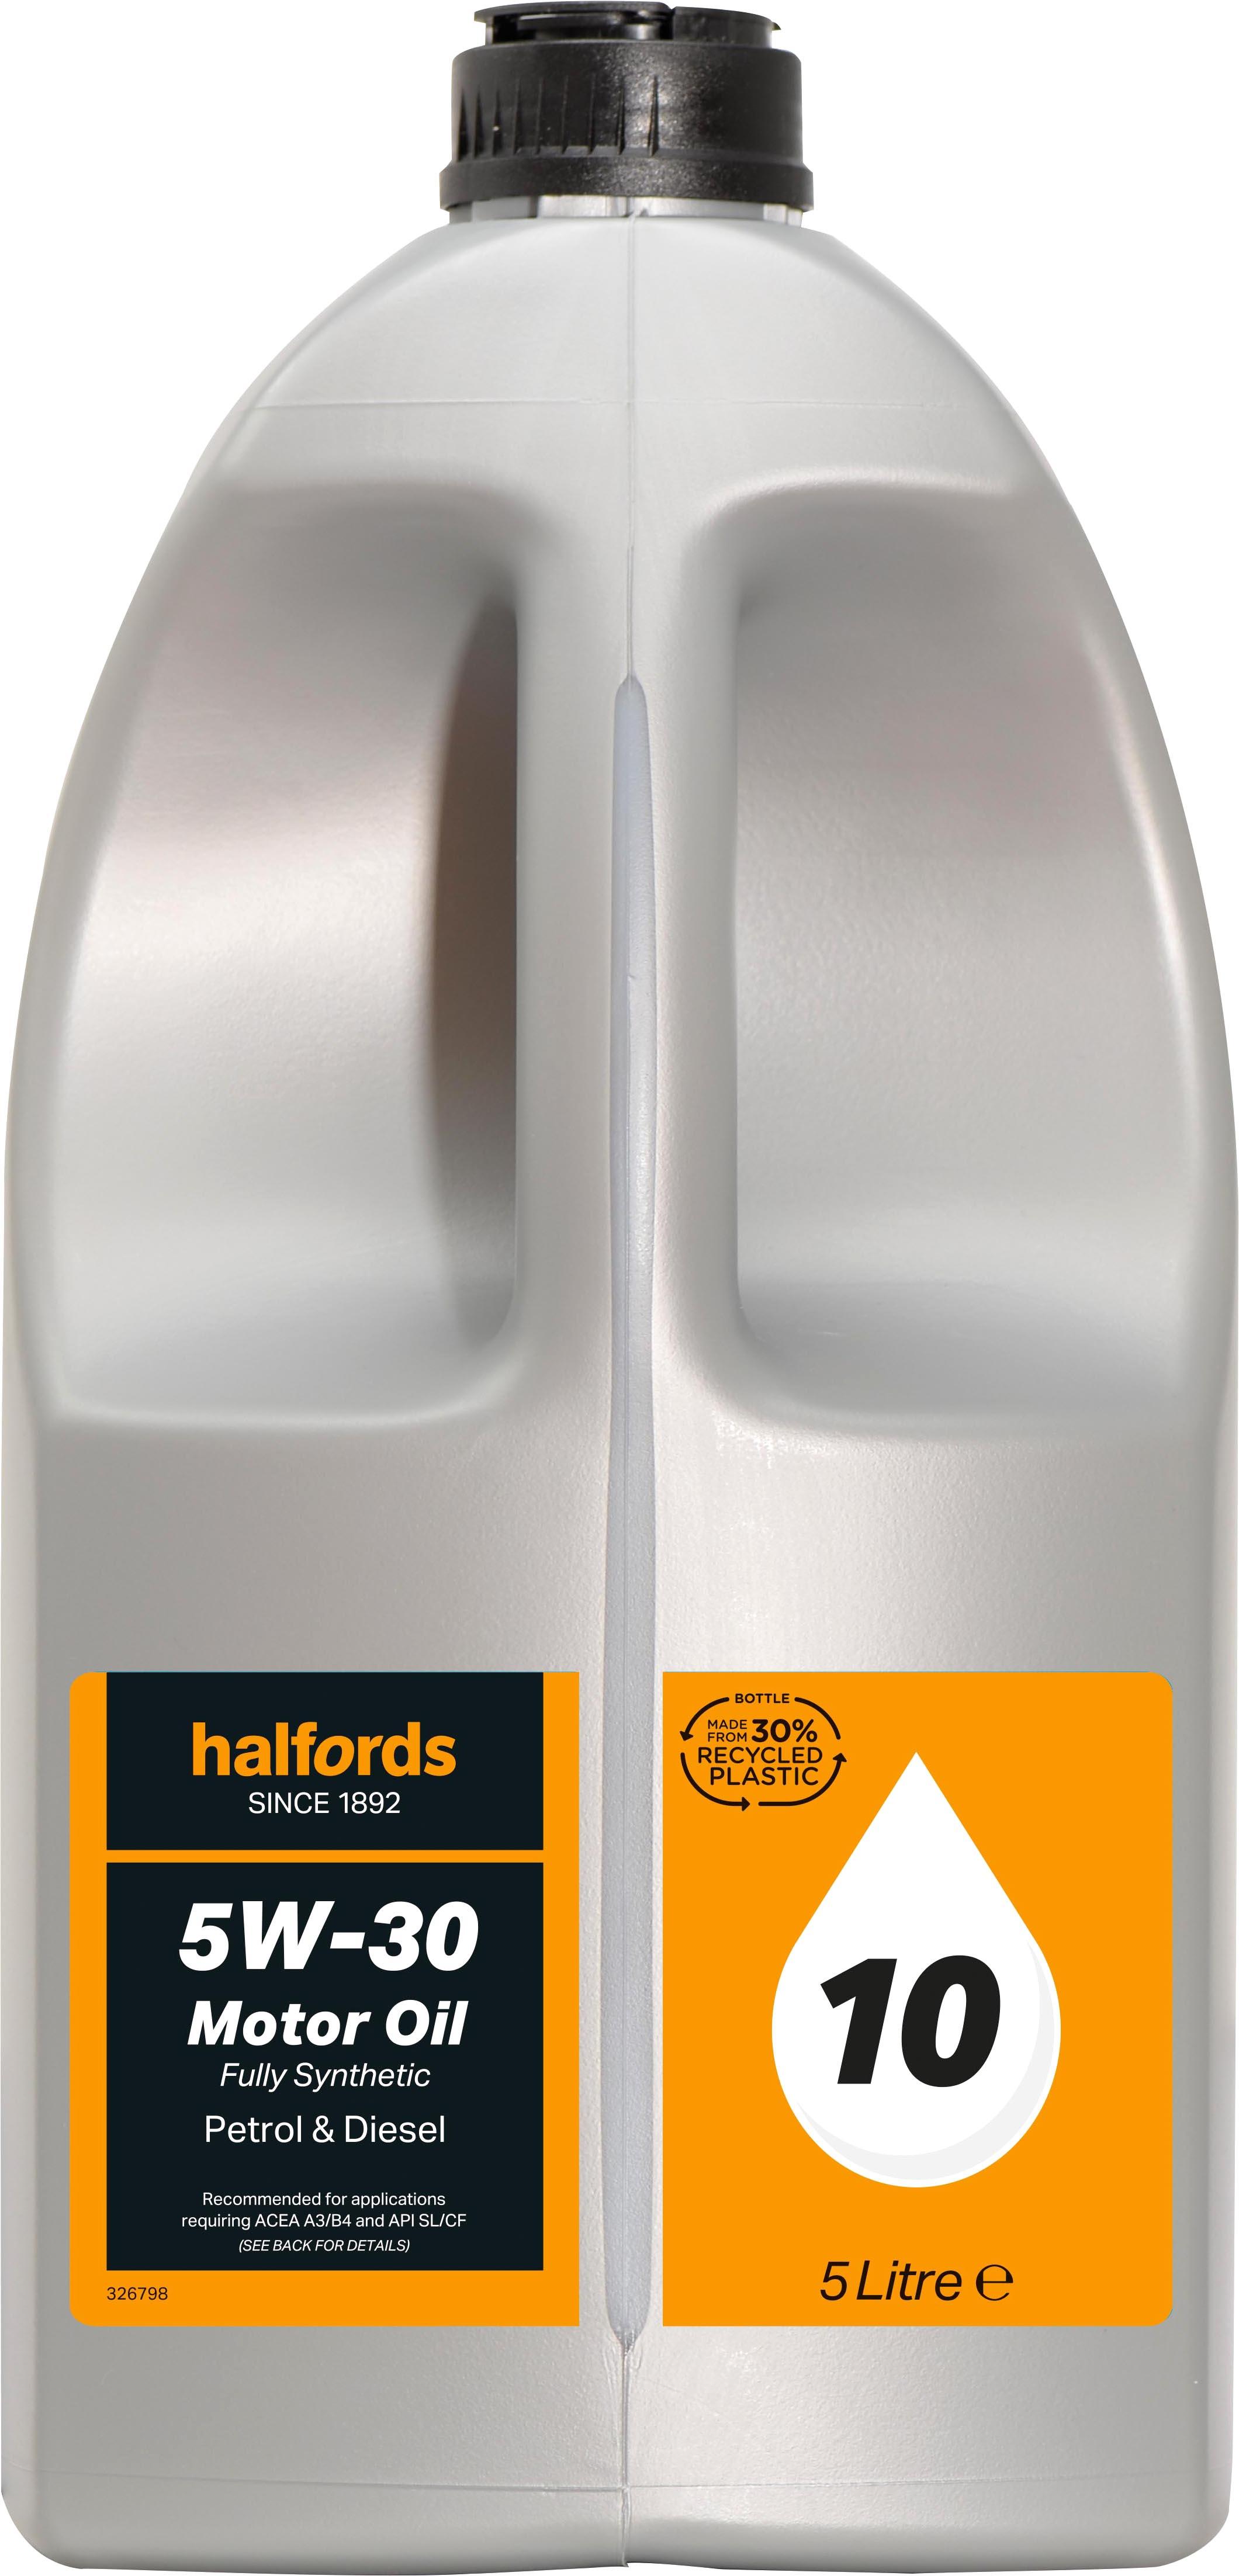 Halfords 5W30 Eco Fully Synthetic Oil 10 - 5 Litres